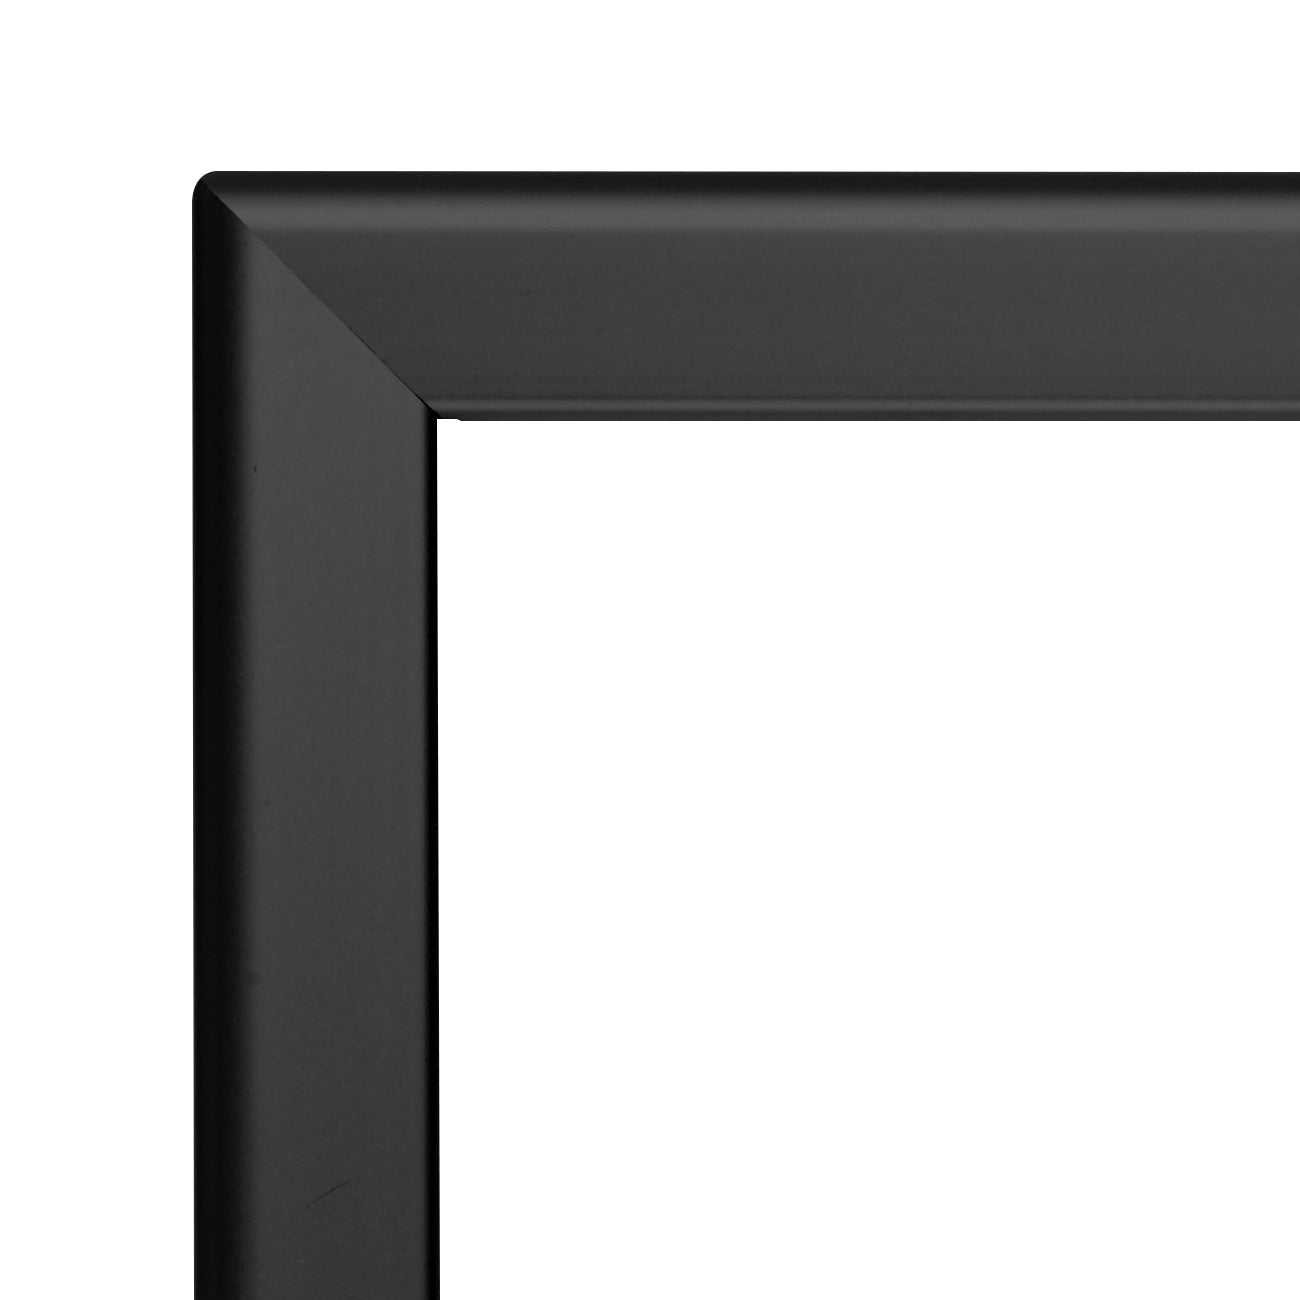 Load image into Gallery viewer, 8.5x11 Black SnapeZo® Snap Frame - 1.25&amp;quot; Profile
